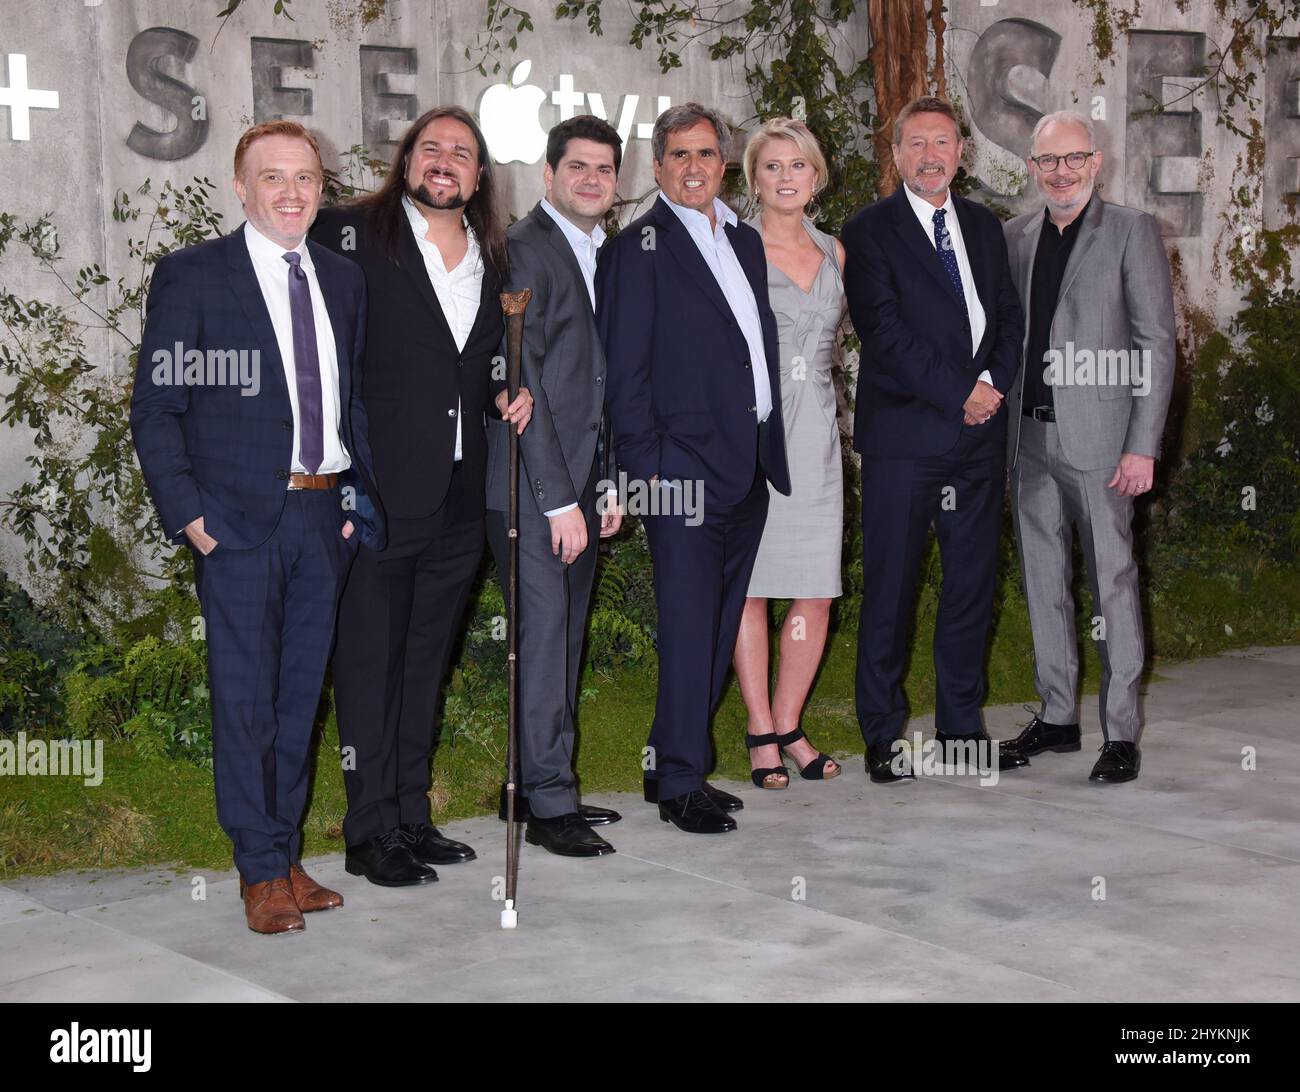 Jon Steinberg, Joe Strechay, Dan Shotz, Peter Chernin, Jenno Topping, Steven Knight and Francis Lawrence at Apple TV+'s 'See' World Premiere held at the Regency Village Theatre on October 21, 2019 in Westwood, CA. Stock Photo